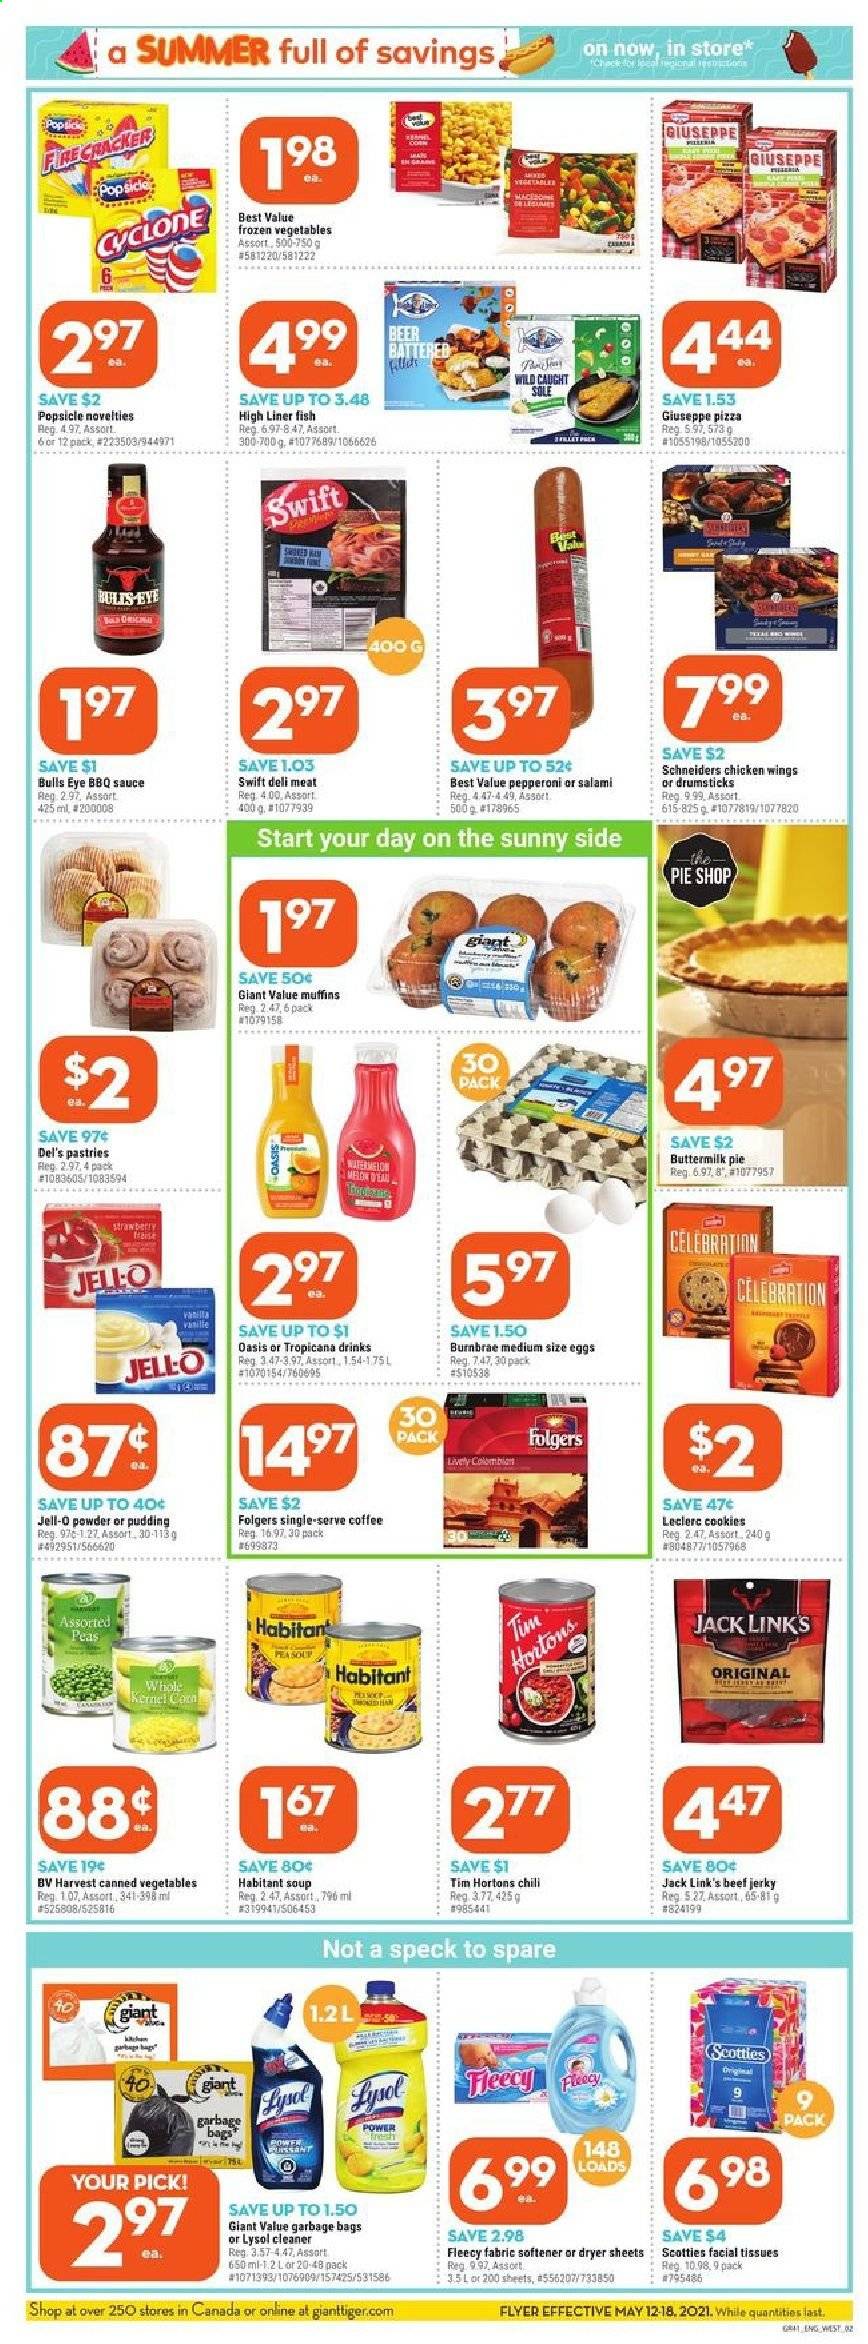 thumbnail - Giant Tiger Flyer - May 12, 2021 - May 18, 2021 - Sales products - muffin, peas, fish, pizza, soup, sauce, beef jerky, salami, jerky, pepperoni, pudding, buttermilk, eggs, frozen vegetables, chicken wings, cookies, Celebration, Jack Link's, Jell-O, canned vegetables, BBQ sauce, coffee, Folgers, L'Or, beer, tissues, cleaner, Lysol, fabric softener, dryer sheets, facial tissues, bag, pen. Page 2.